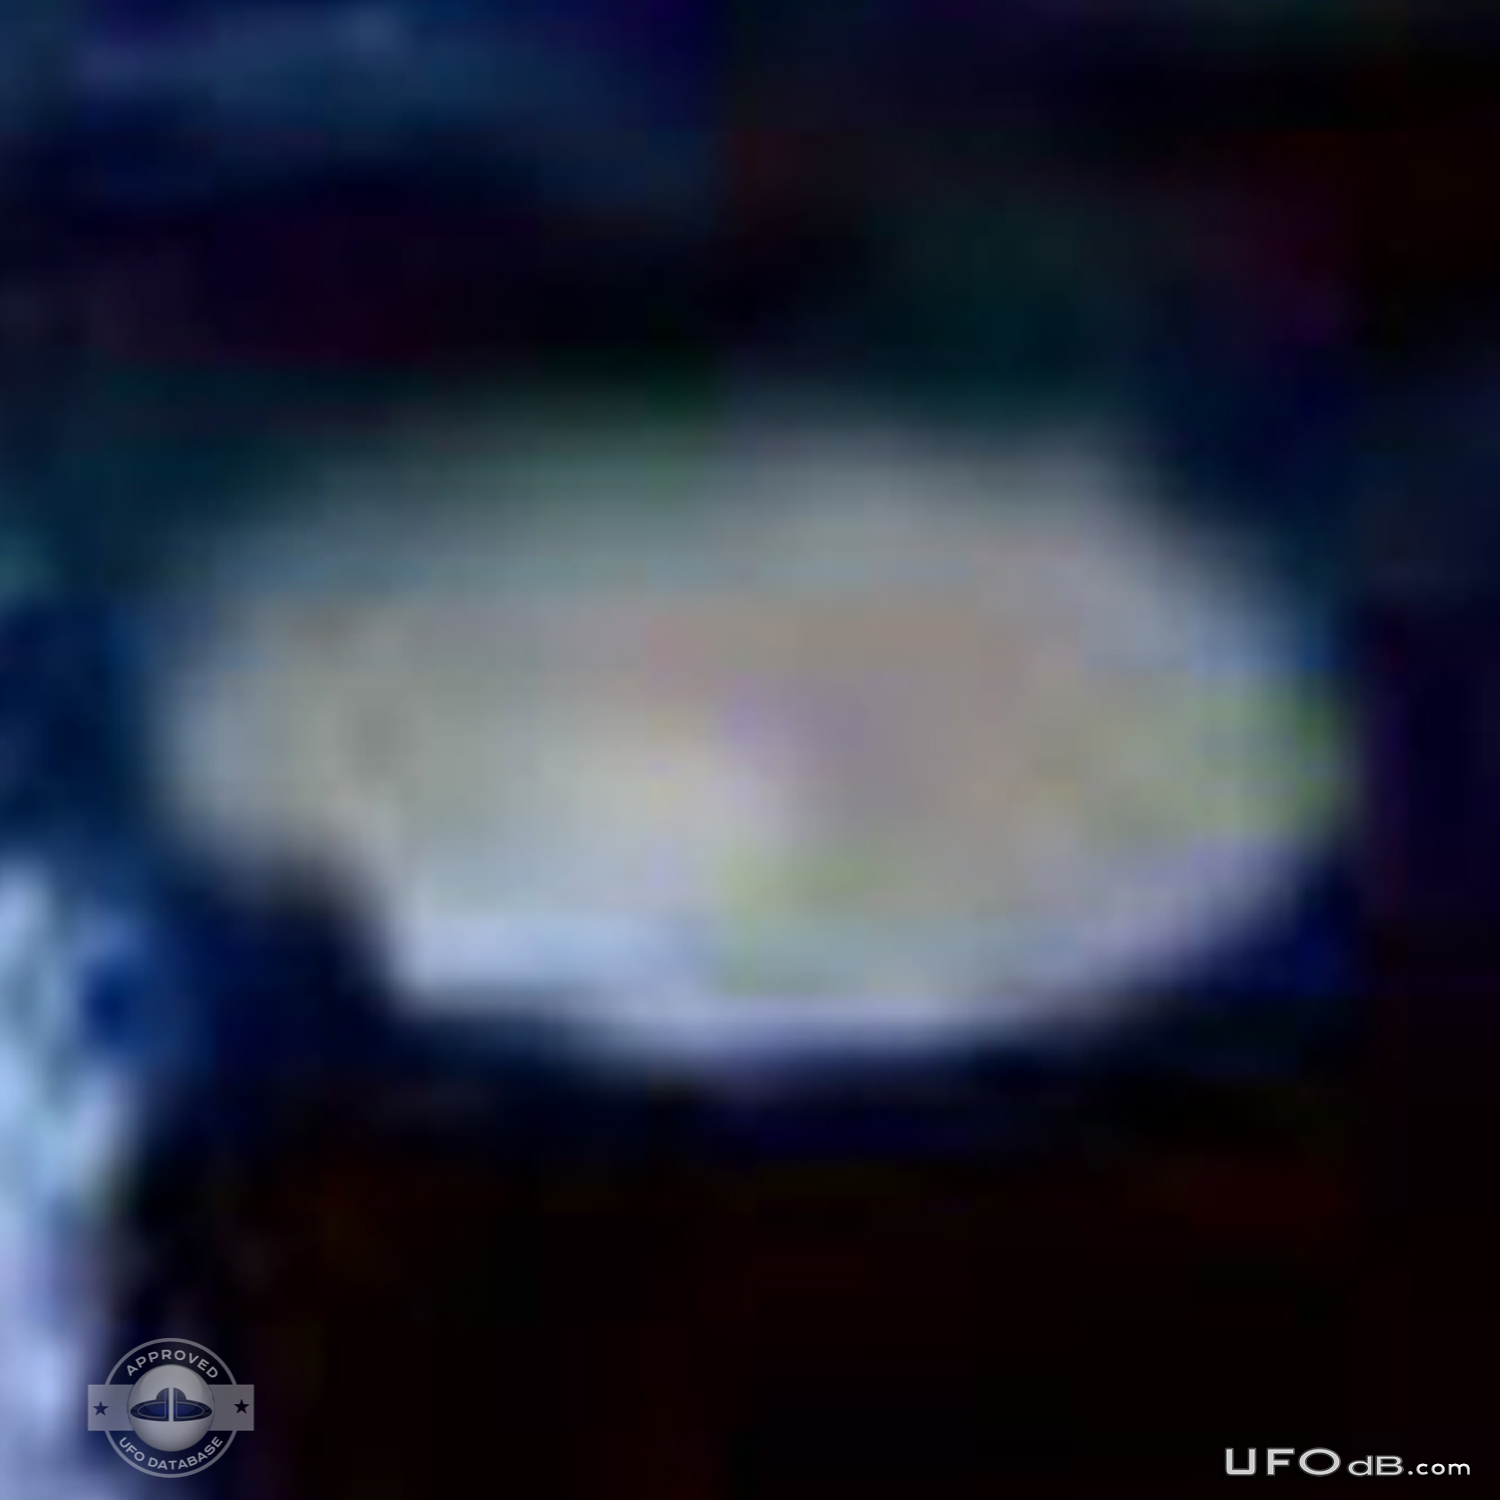 Car driver captures very fast UFO on picture | Michigan | April 8 2011 UFO Picture #264-7